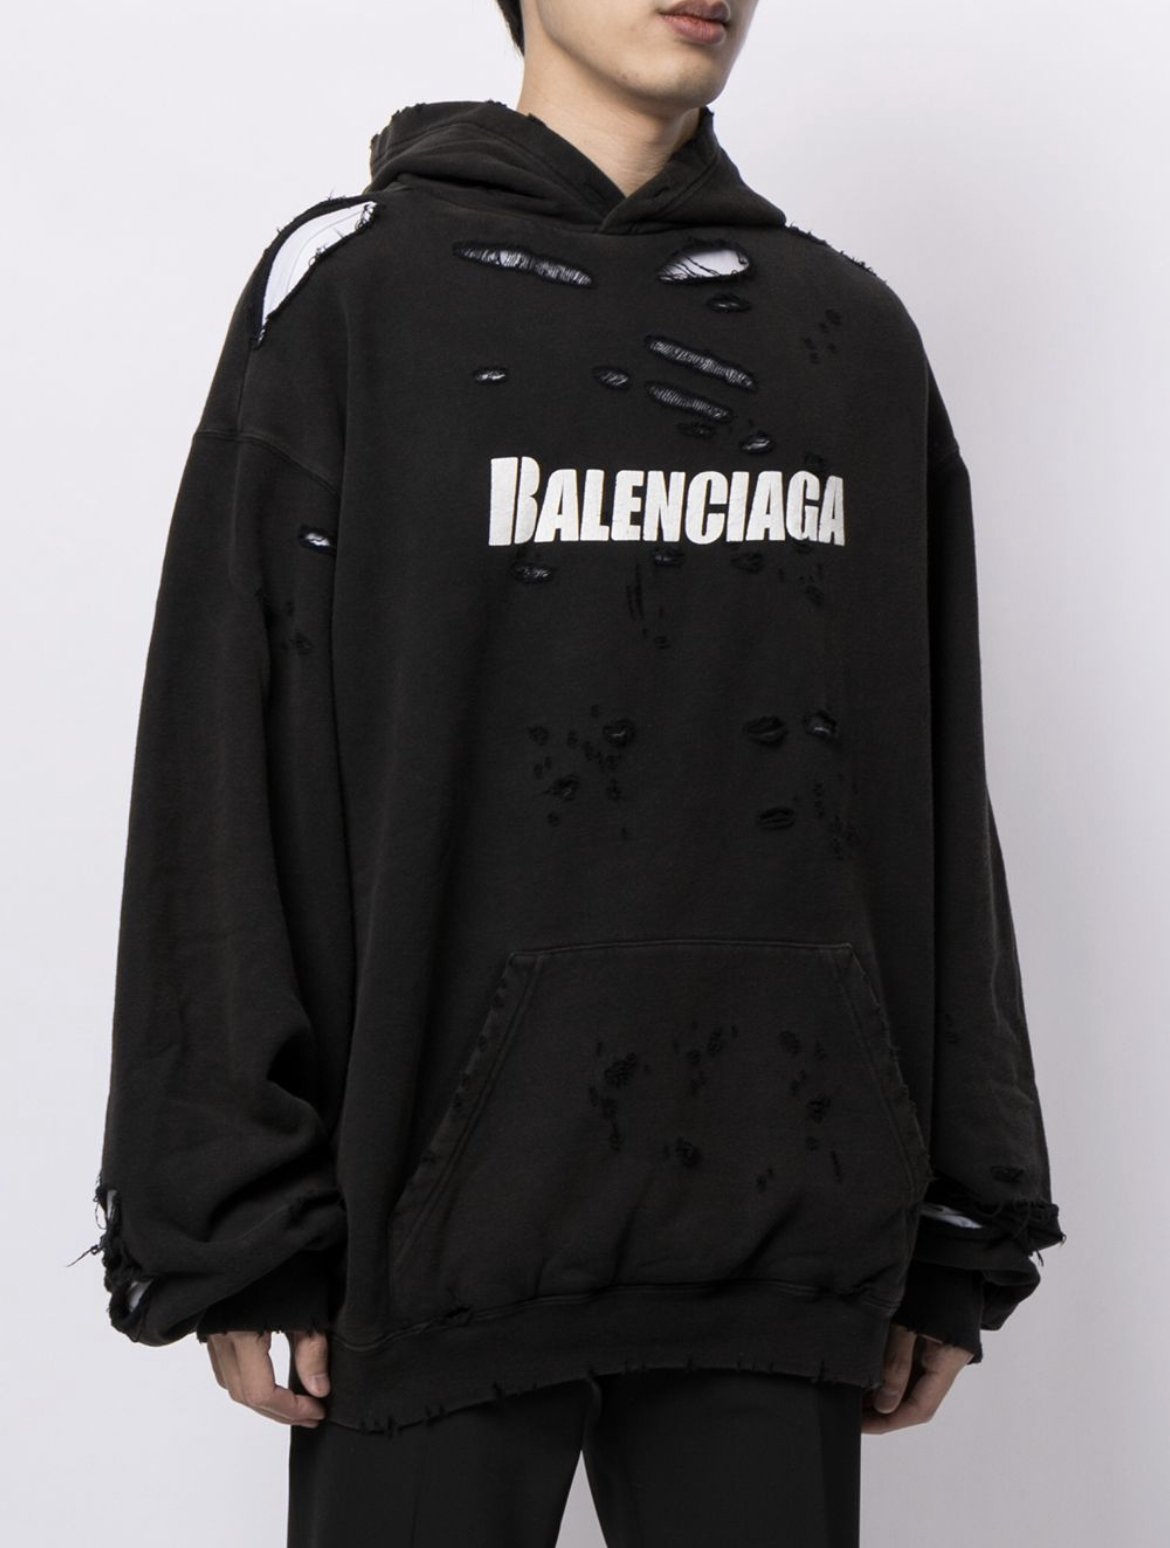 Balenciaga Is Selling A Destroyed Jumper For 1150